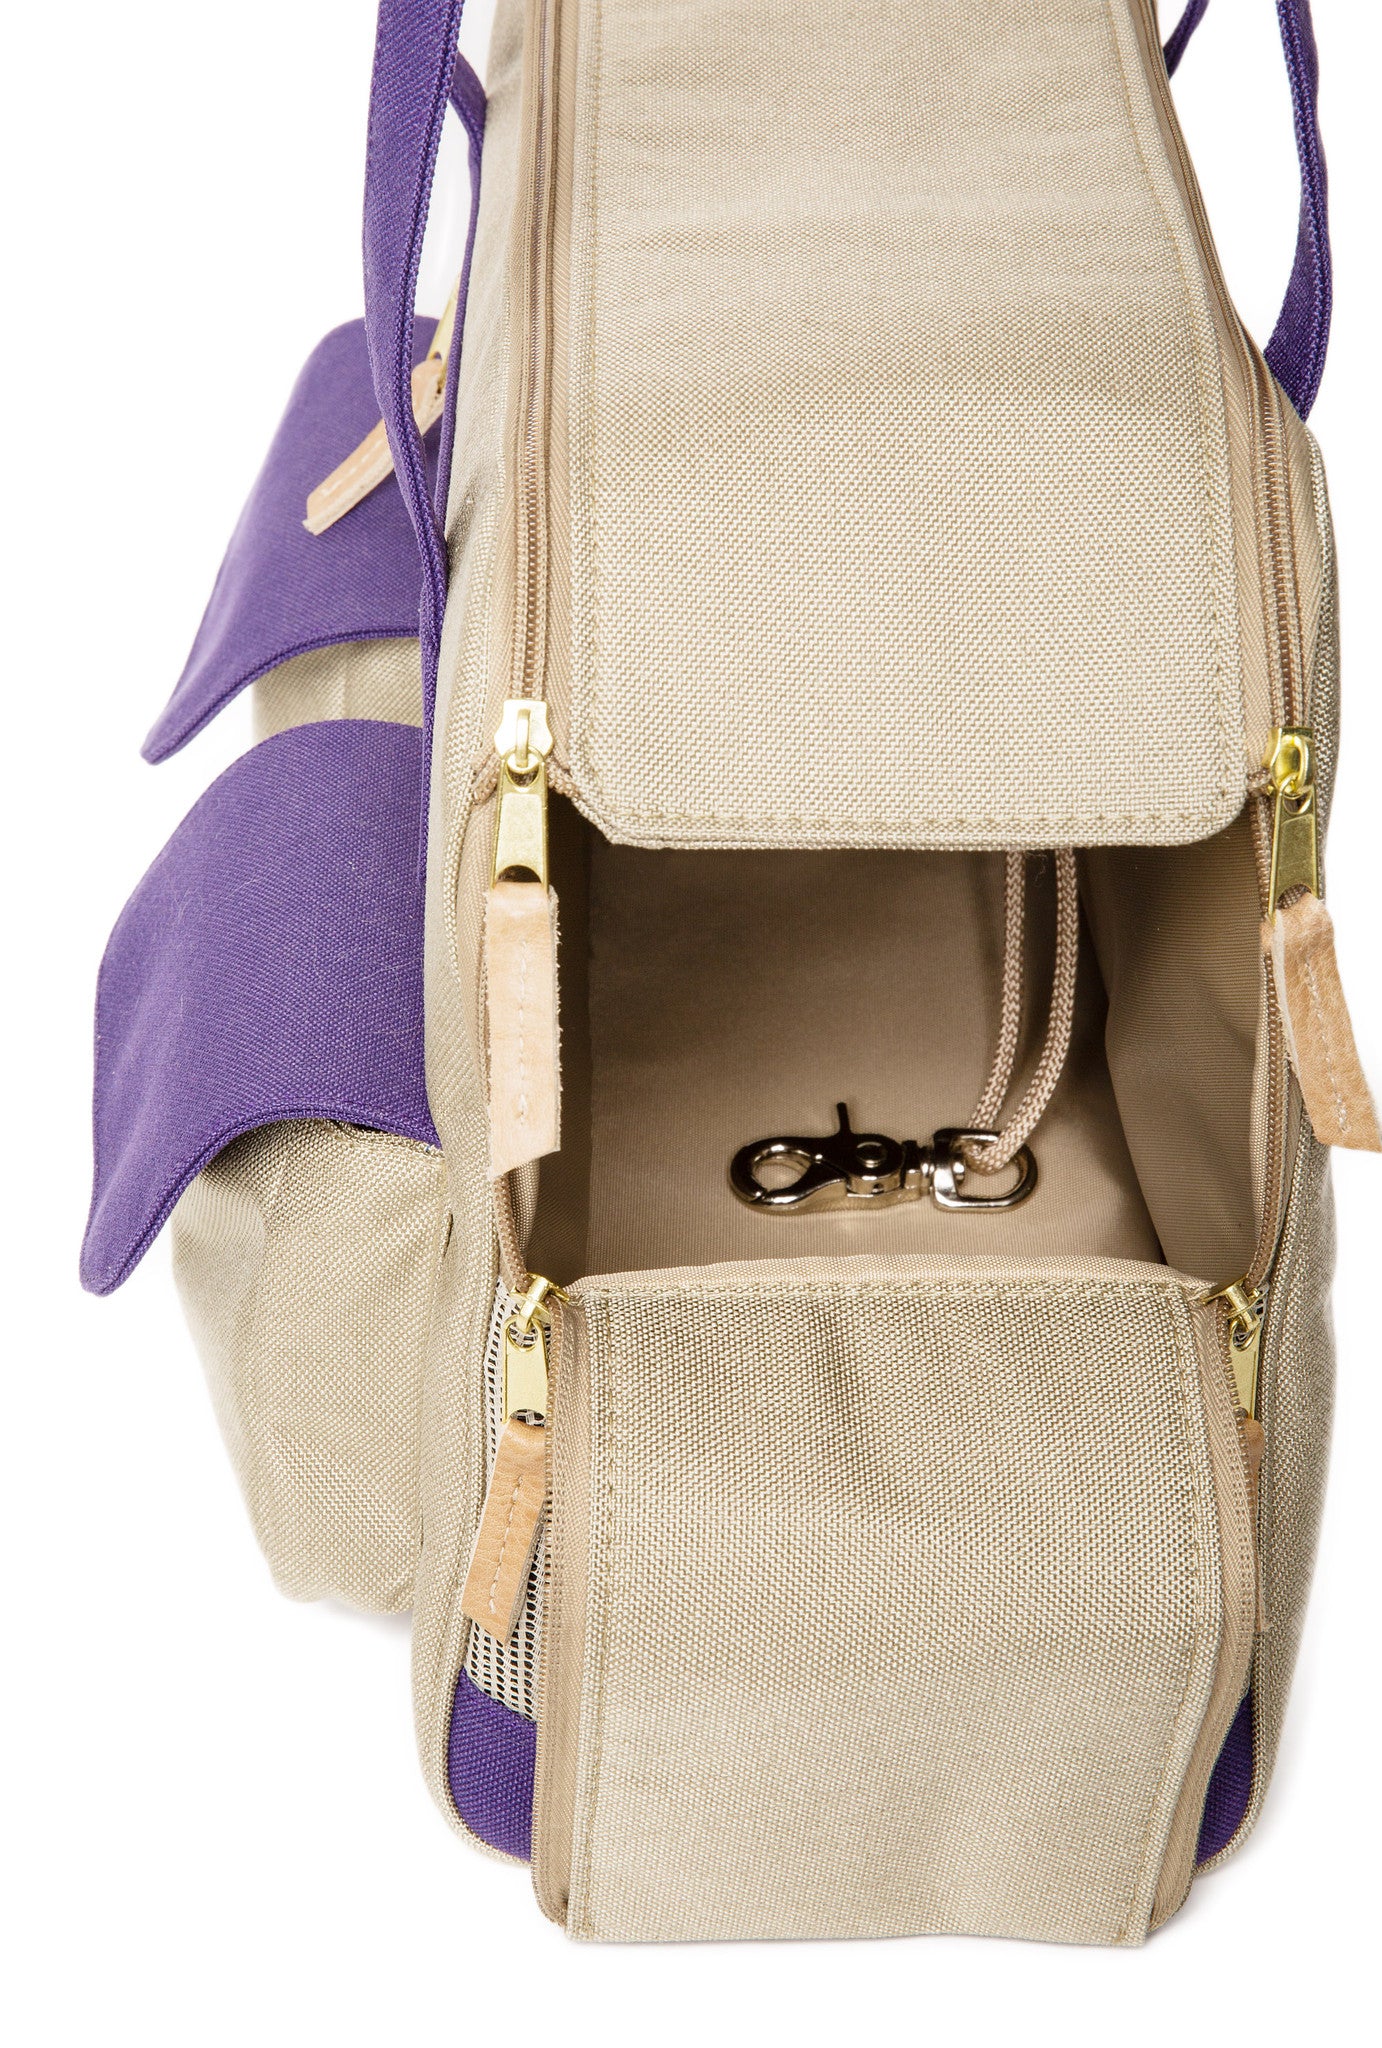 Spring/Summer - Canvas Dog Carrier Beige w/Colored Canvas Trim - 5 Color Options